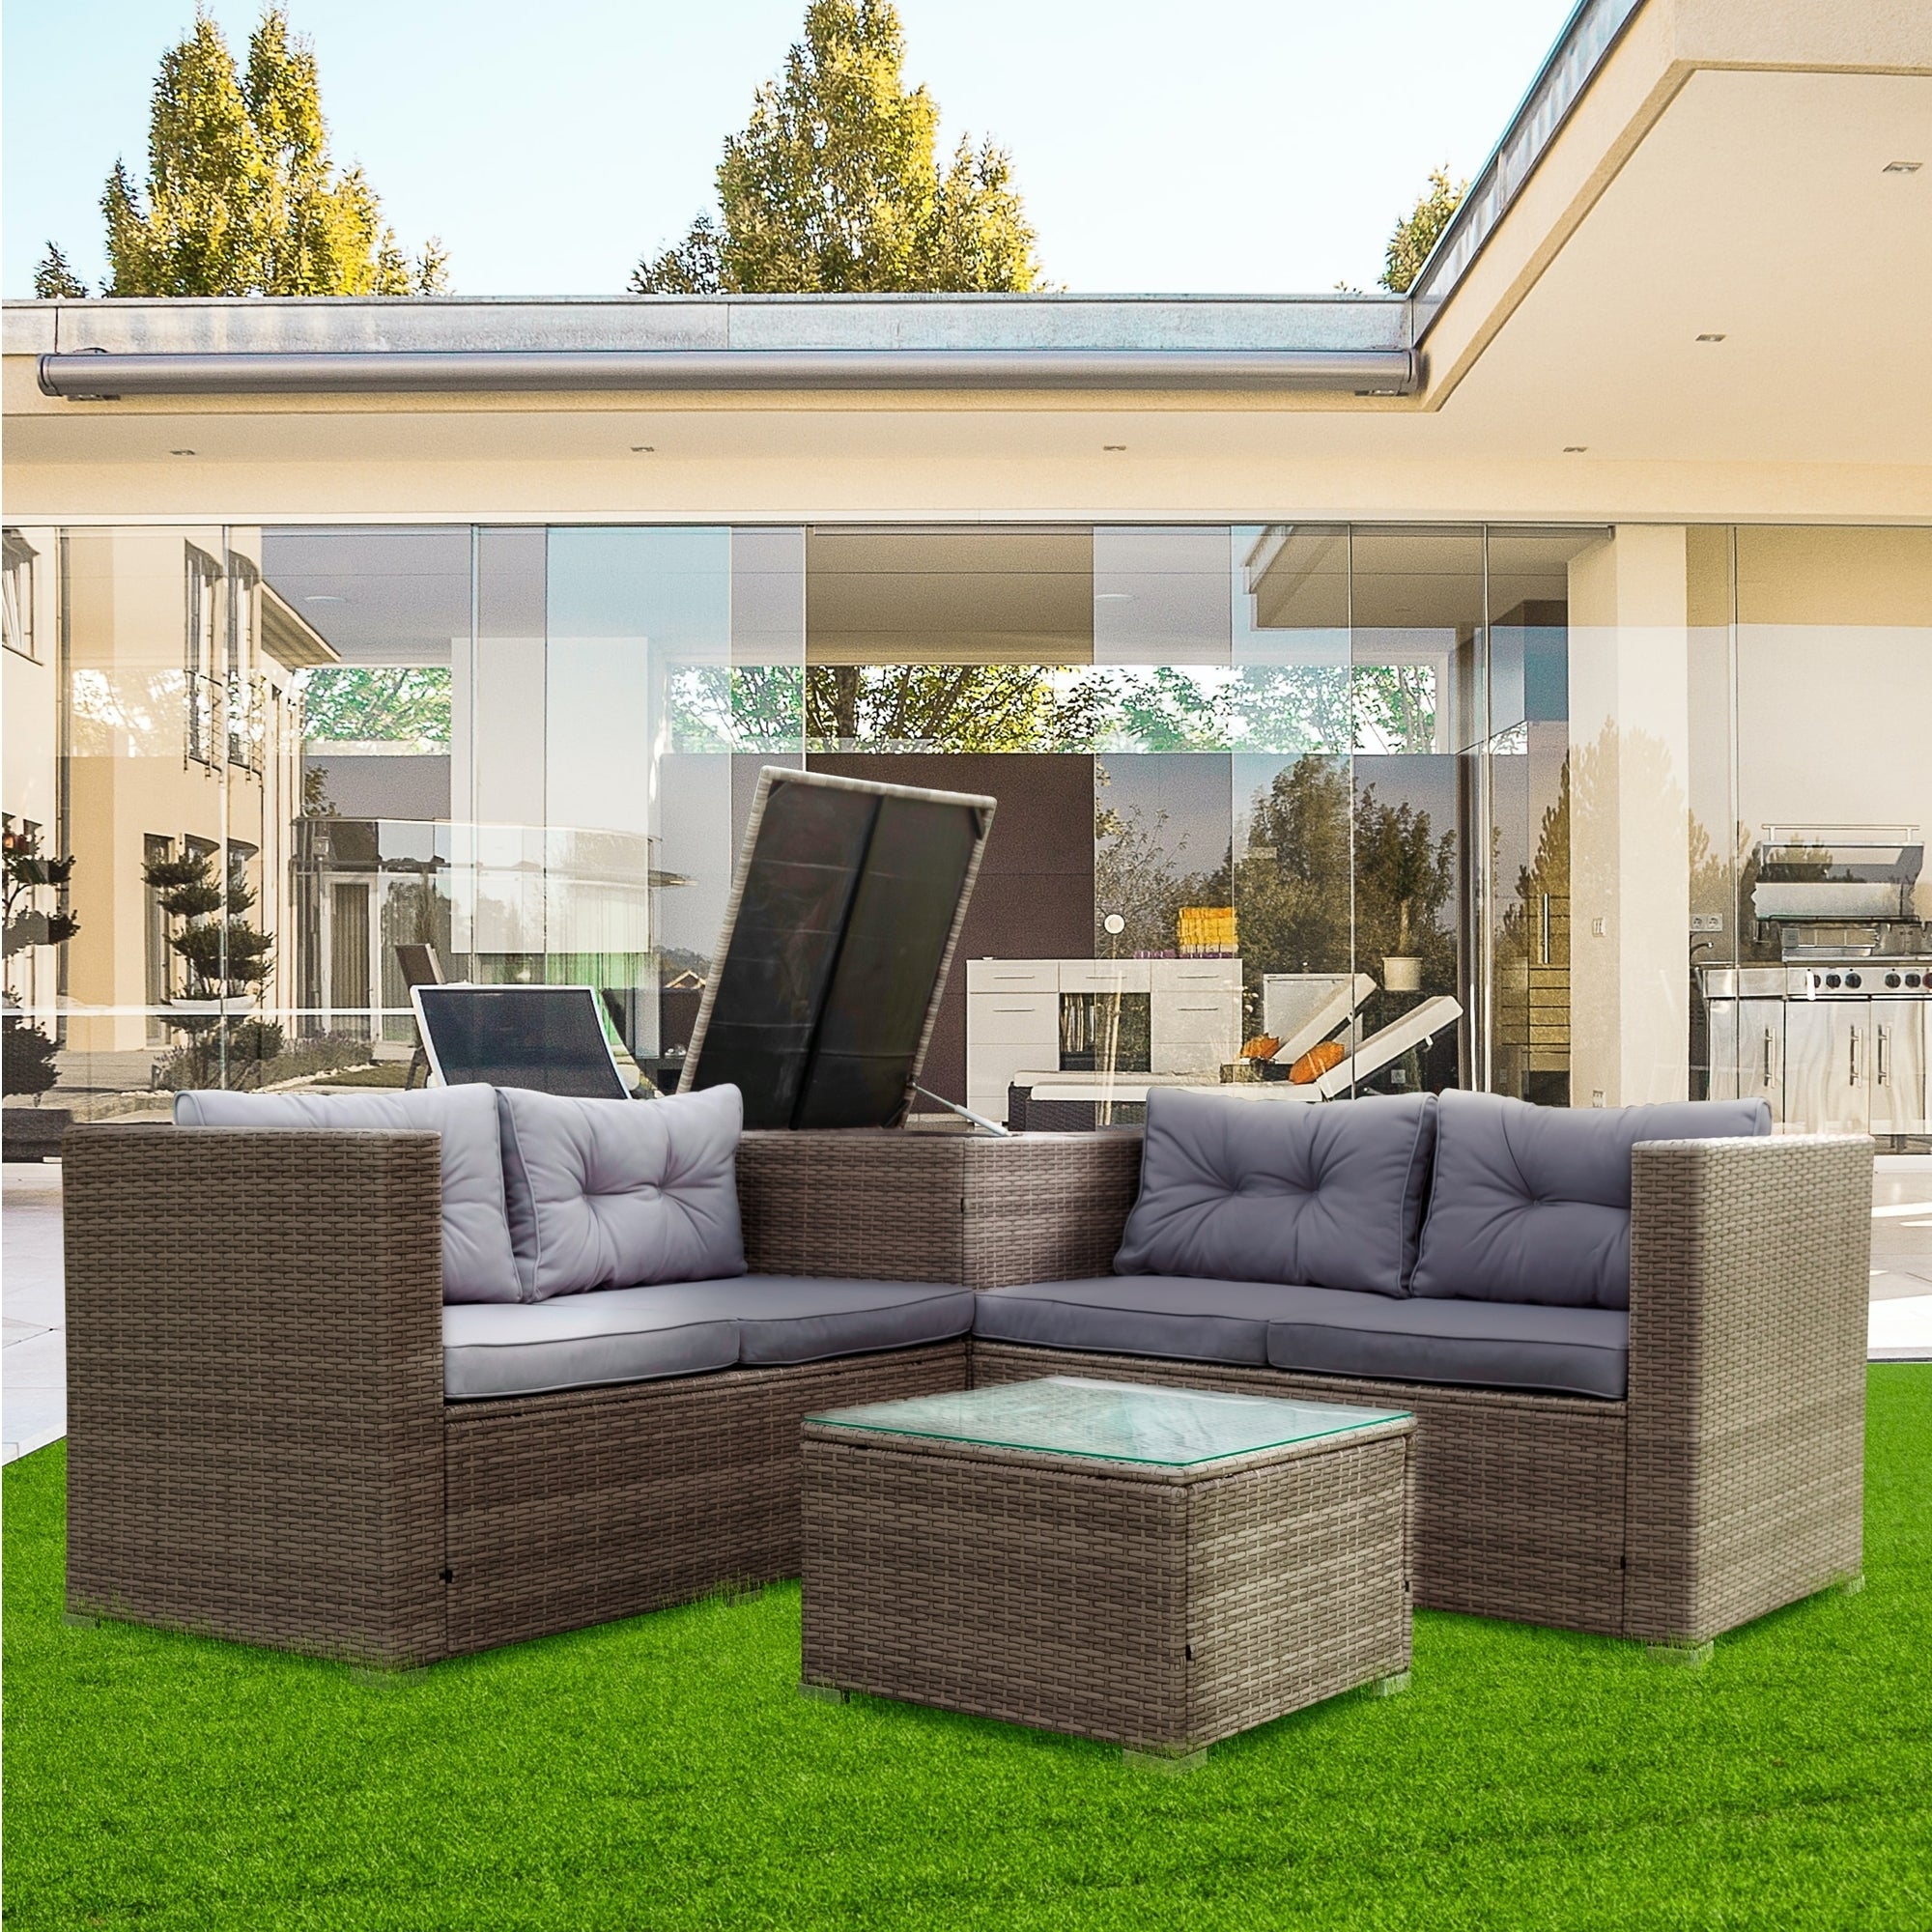 4 Piece Patio Sectional 